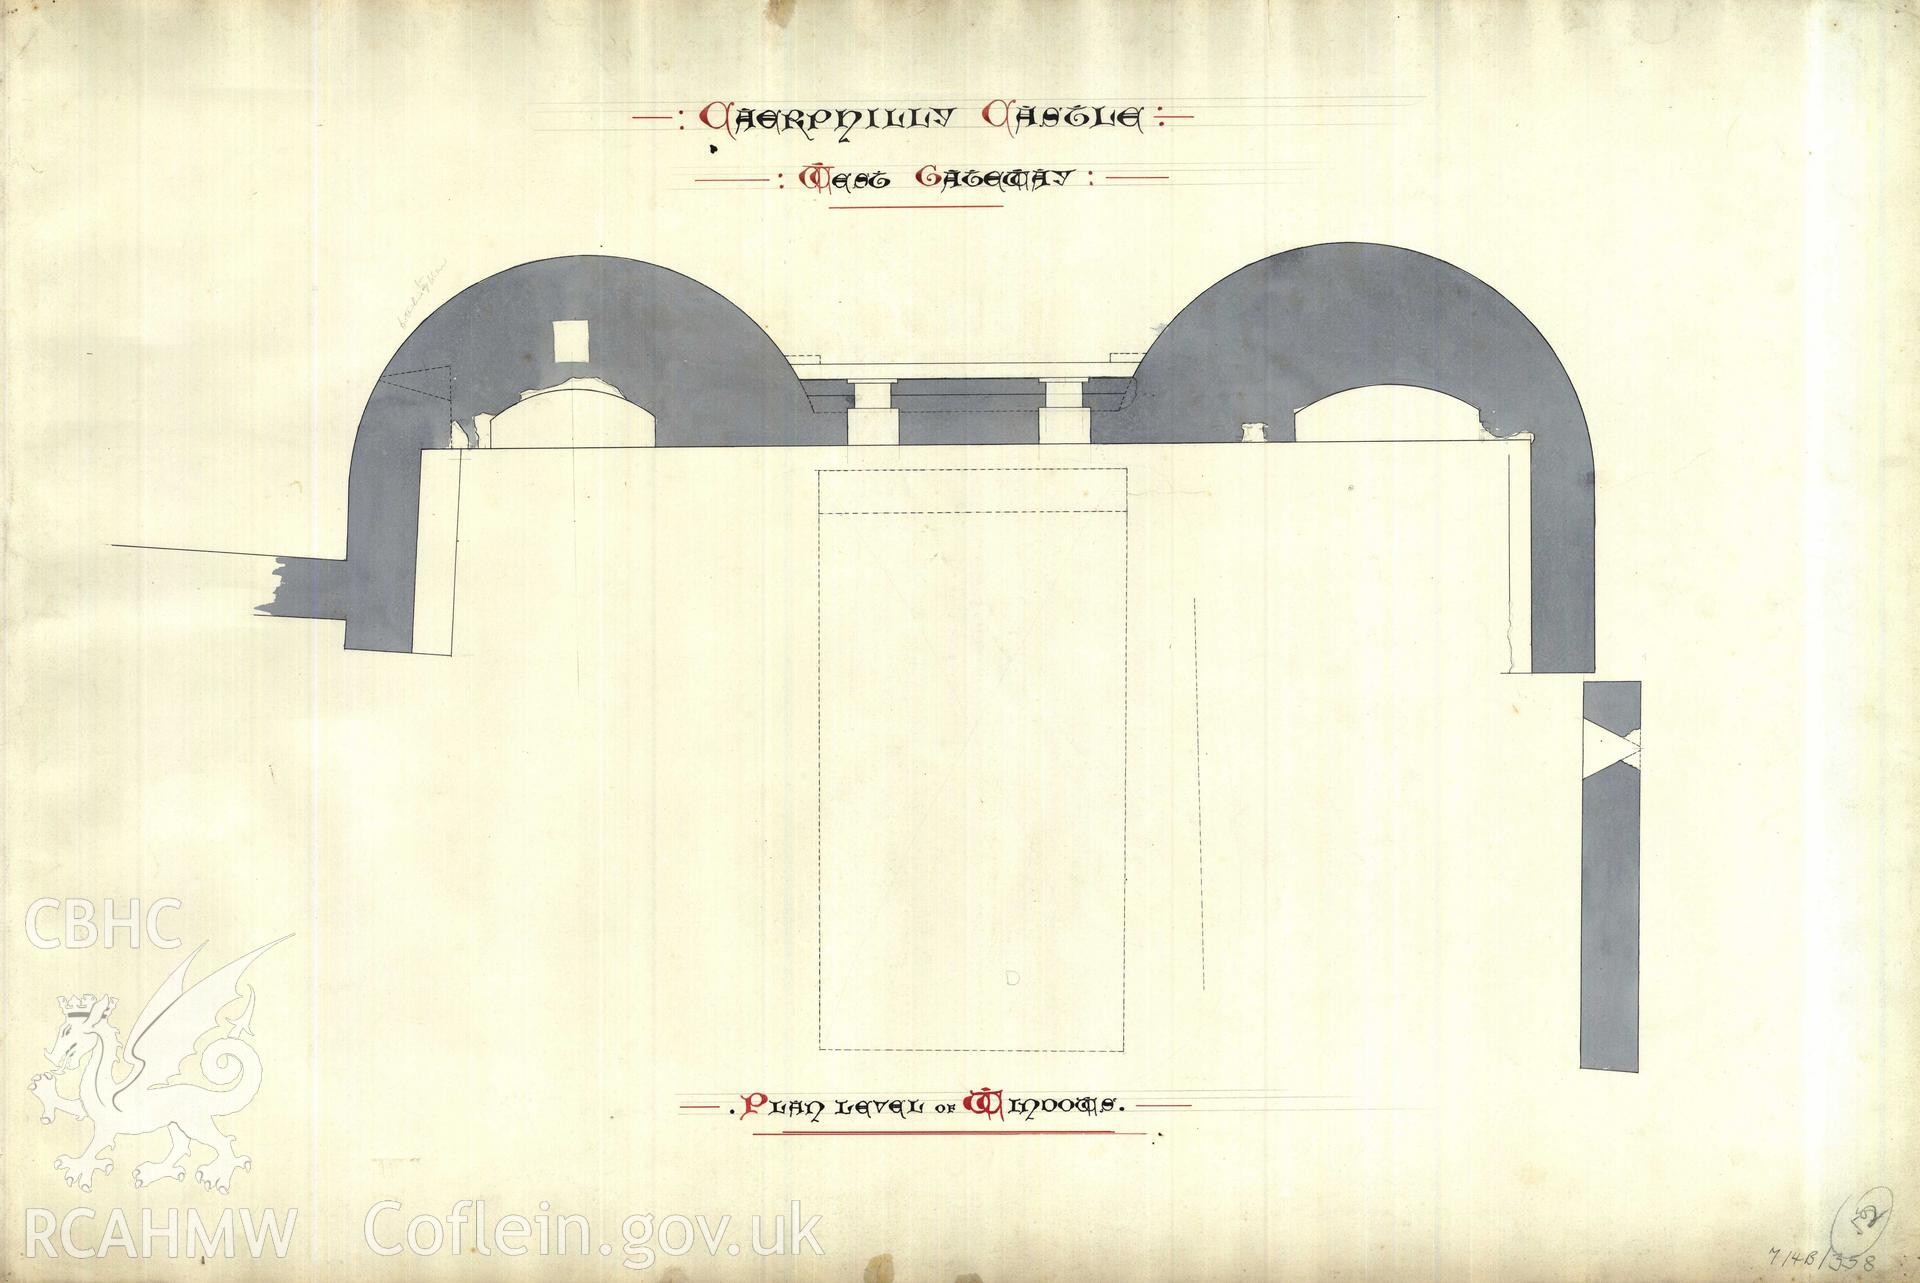 Cadw guardianship monument drawing of Caerphilly Castle. Mid W gate, upper plan. Cadw Ref. No:714B/358. Scale 1:24.